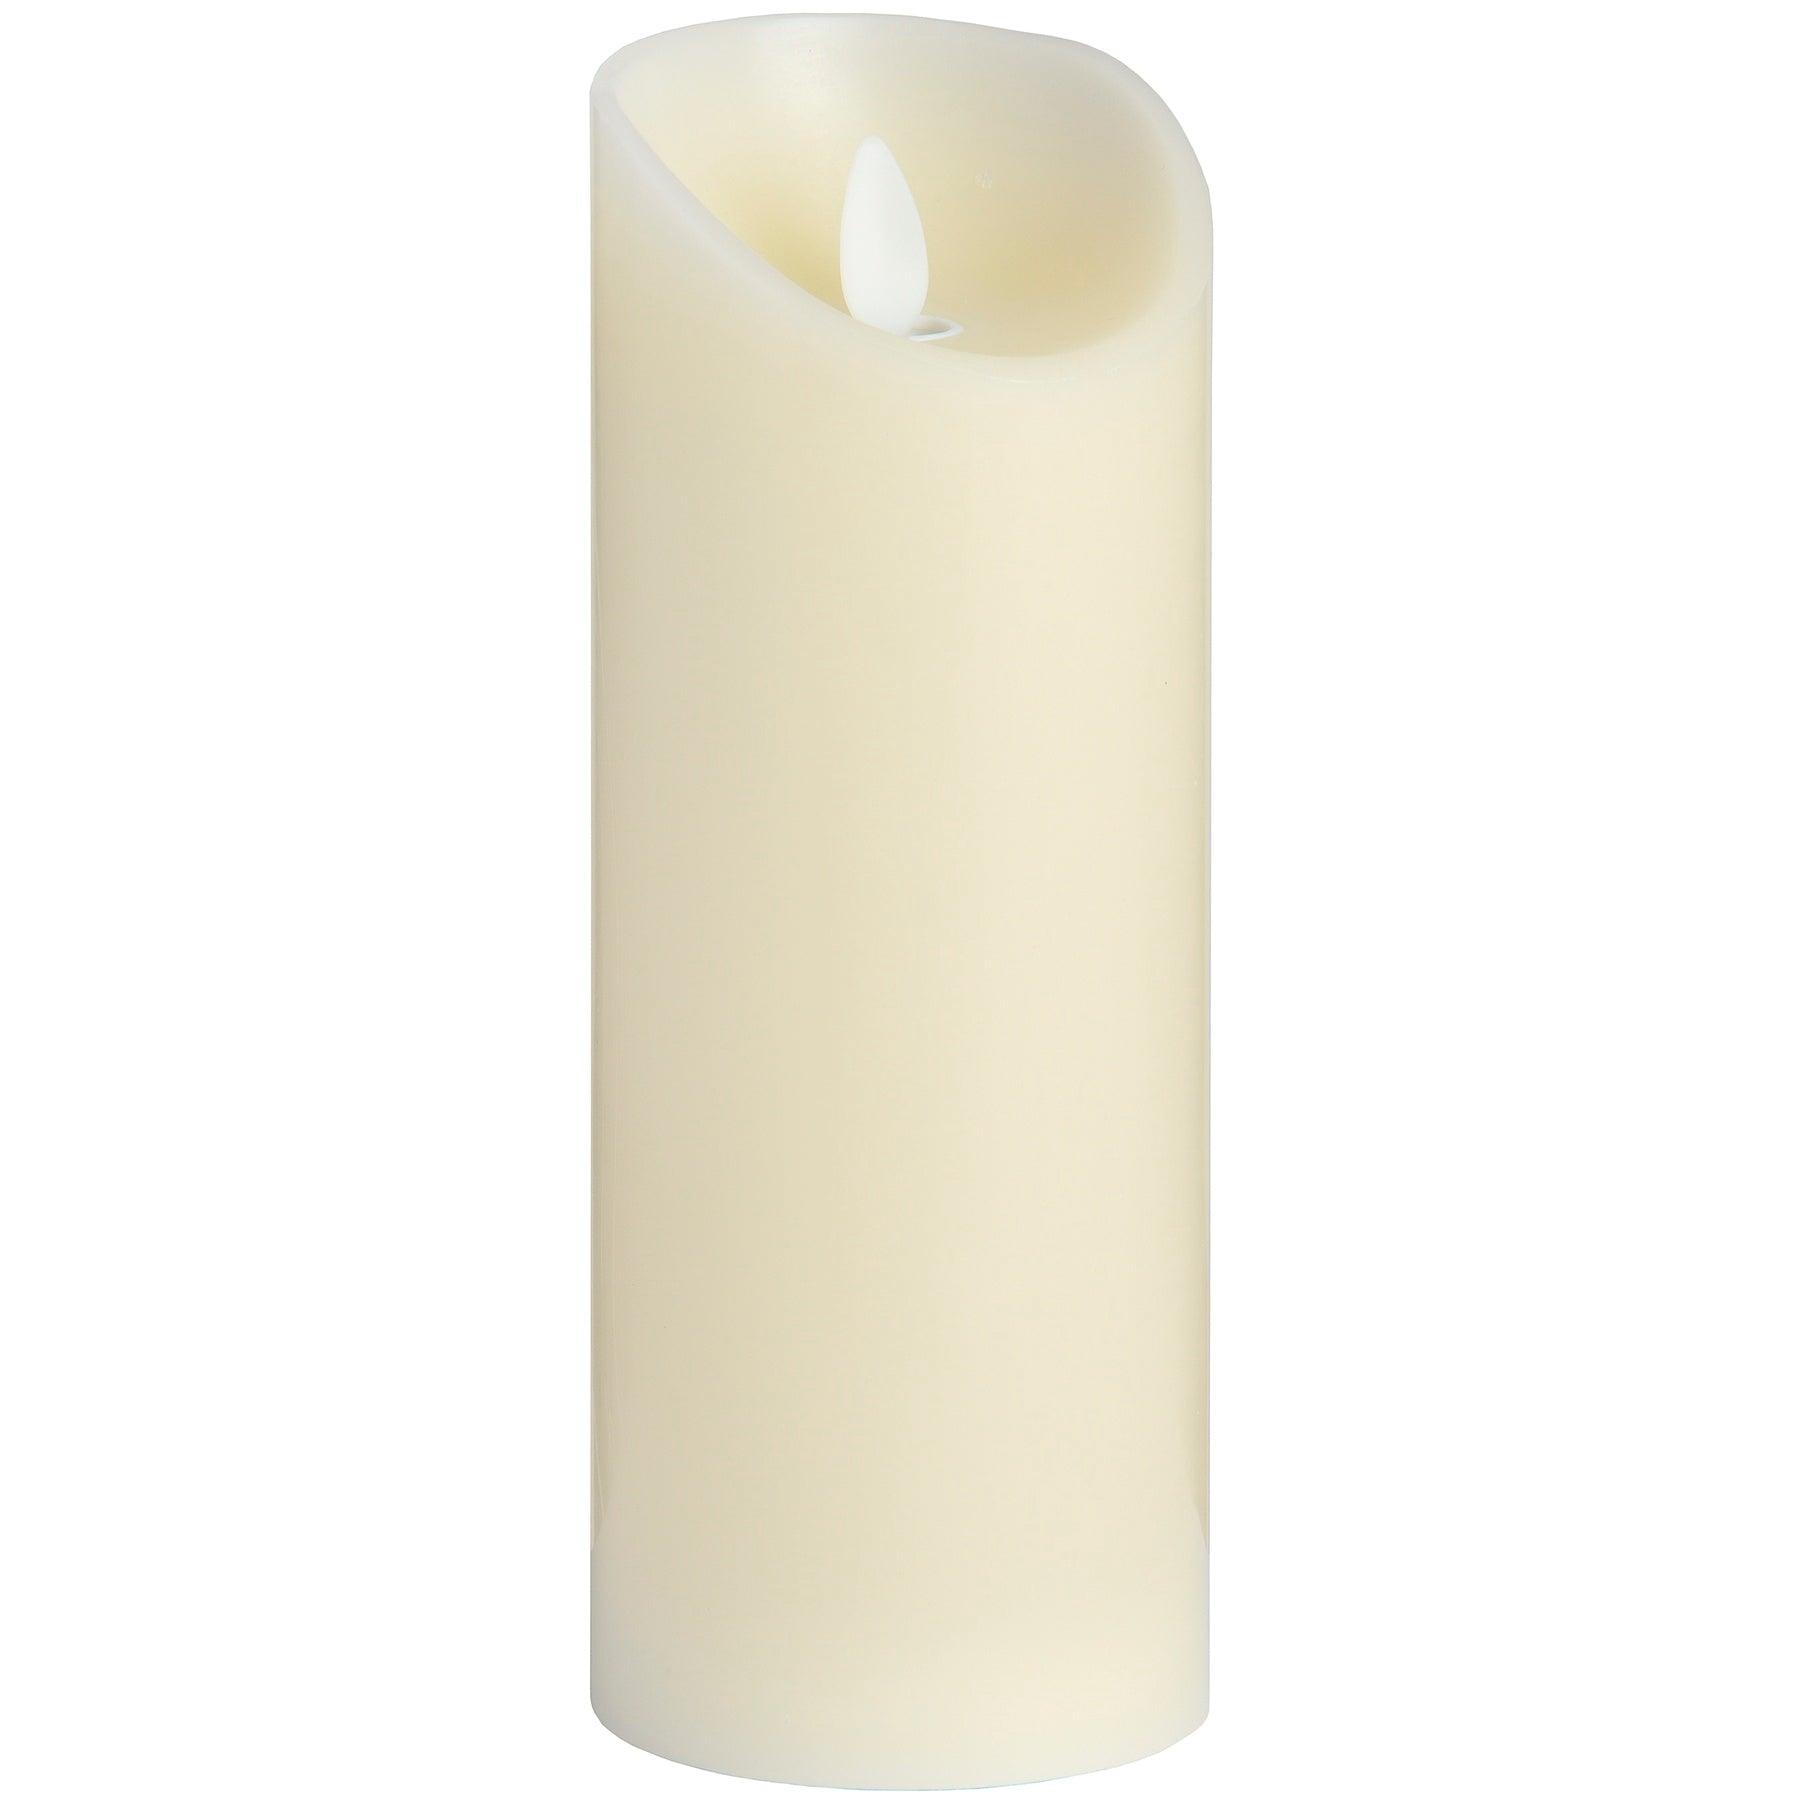 View Luxe Collection 3 x 8 Cream Flickering Flame LED Wax Candle information